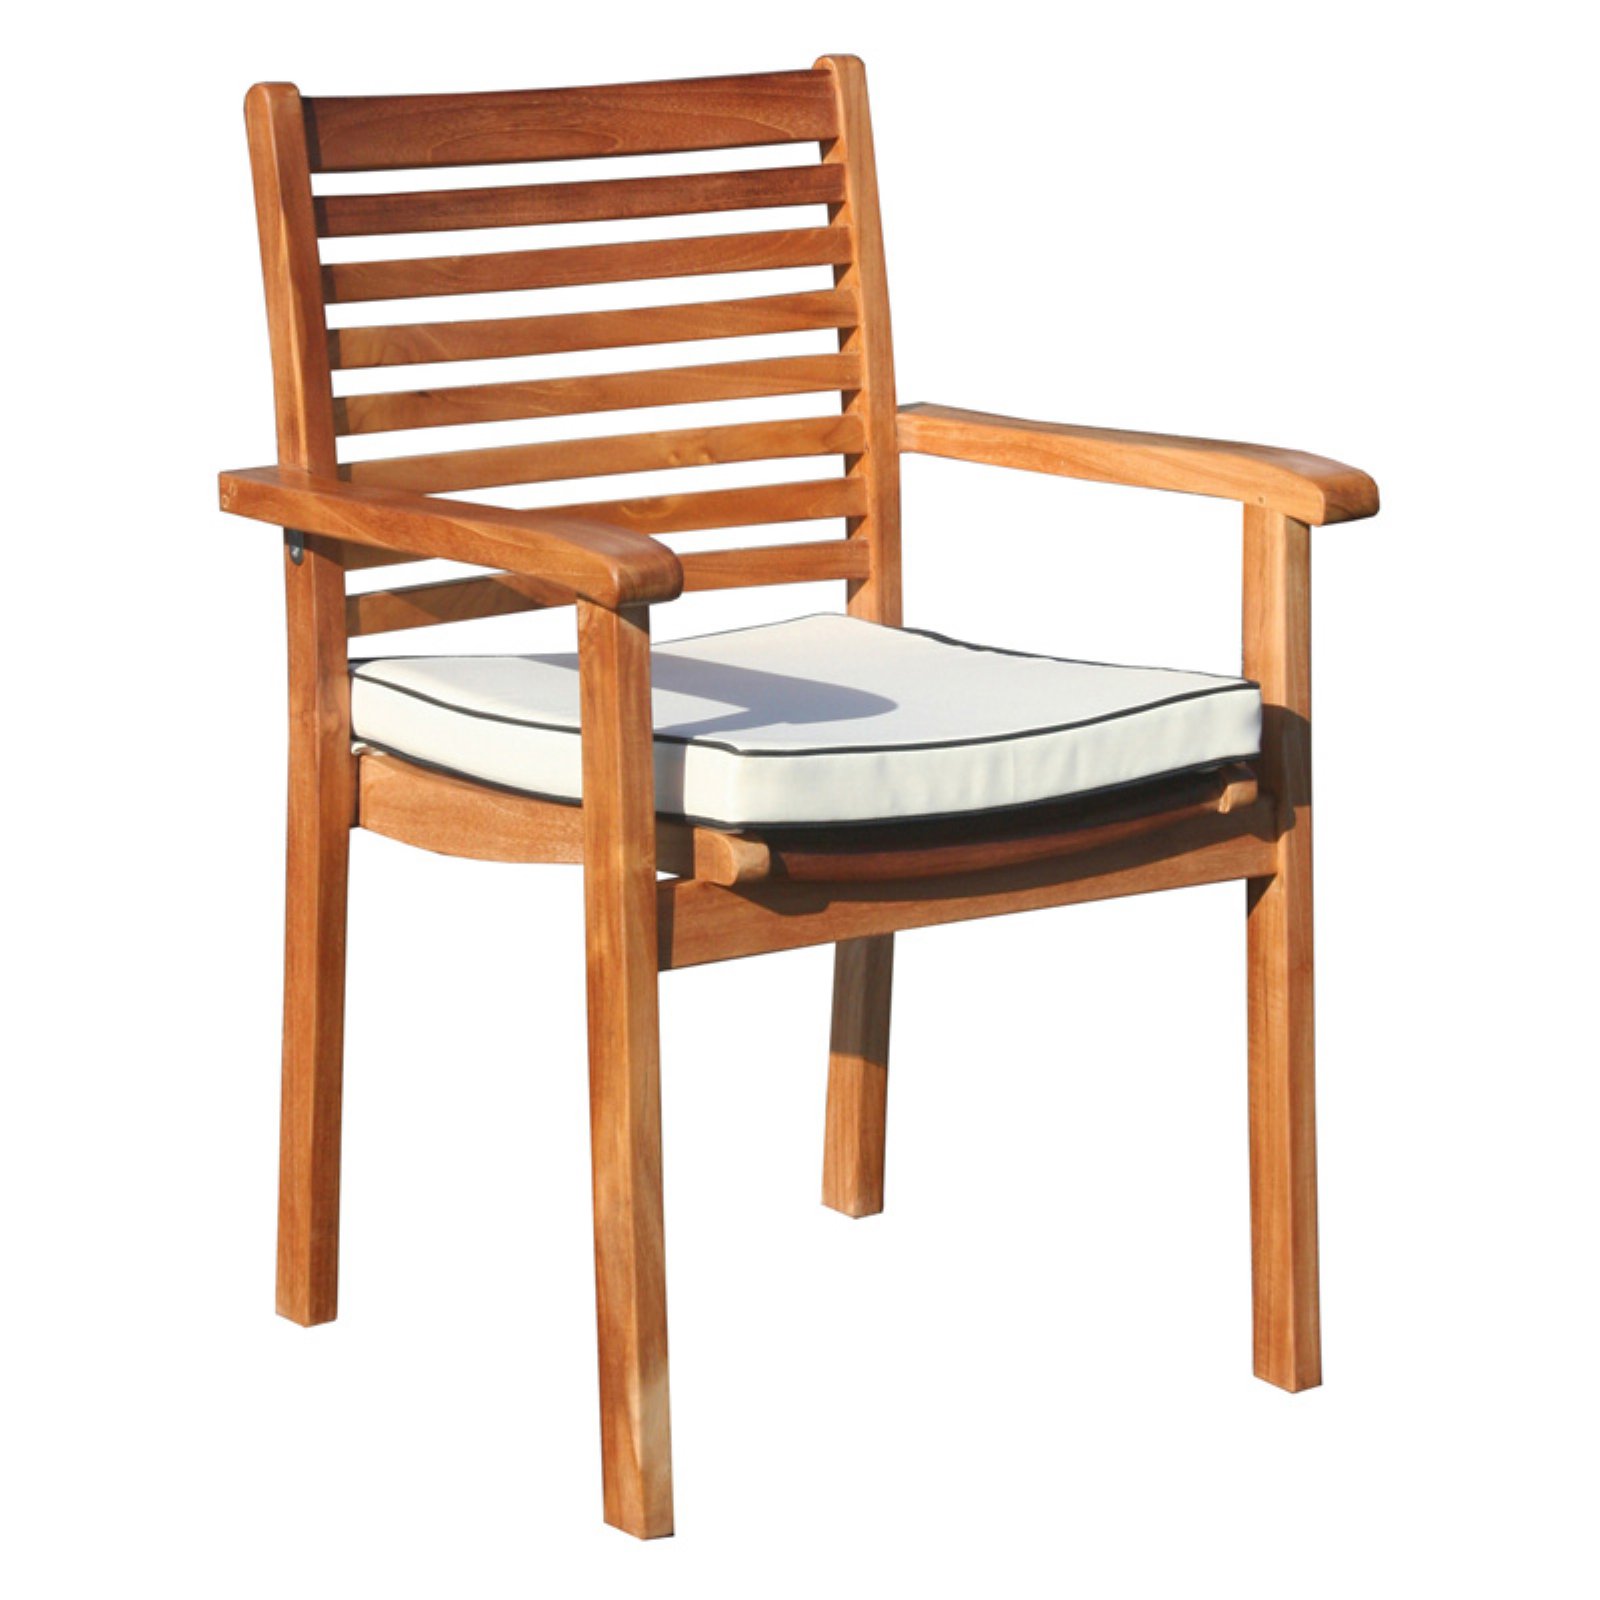 Chic Teak Italy Teak Stacking Patio Dining Chair - image 3 of 7